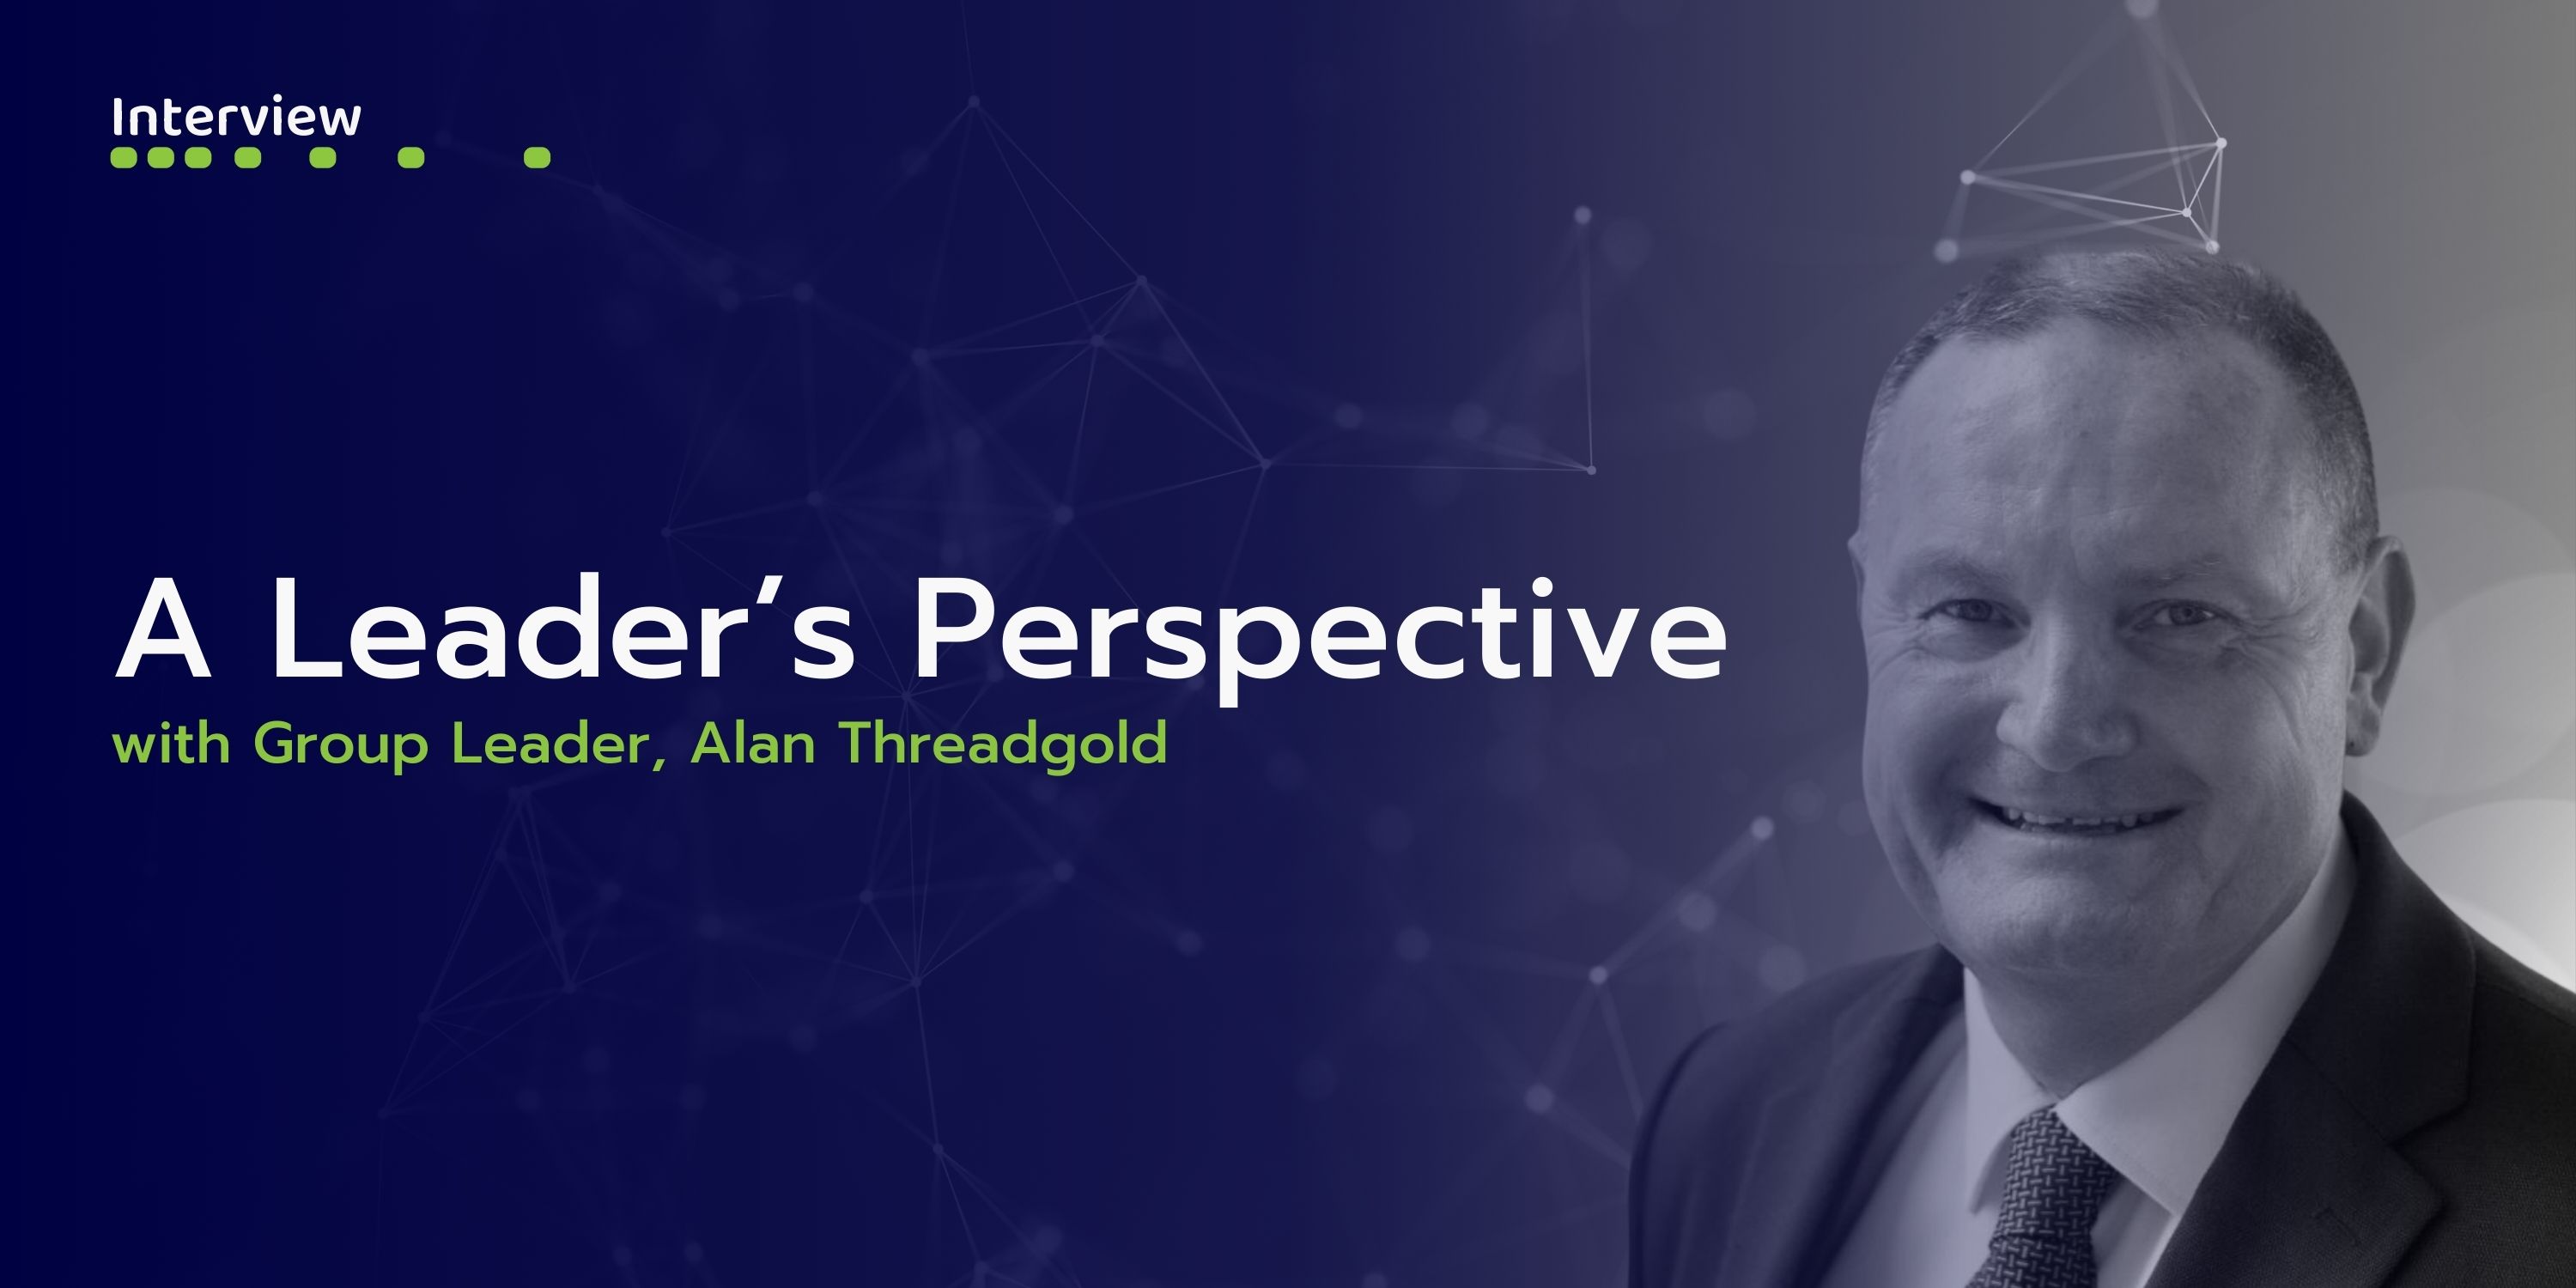 A Leader's Perspective with Alan Threadgold